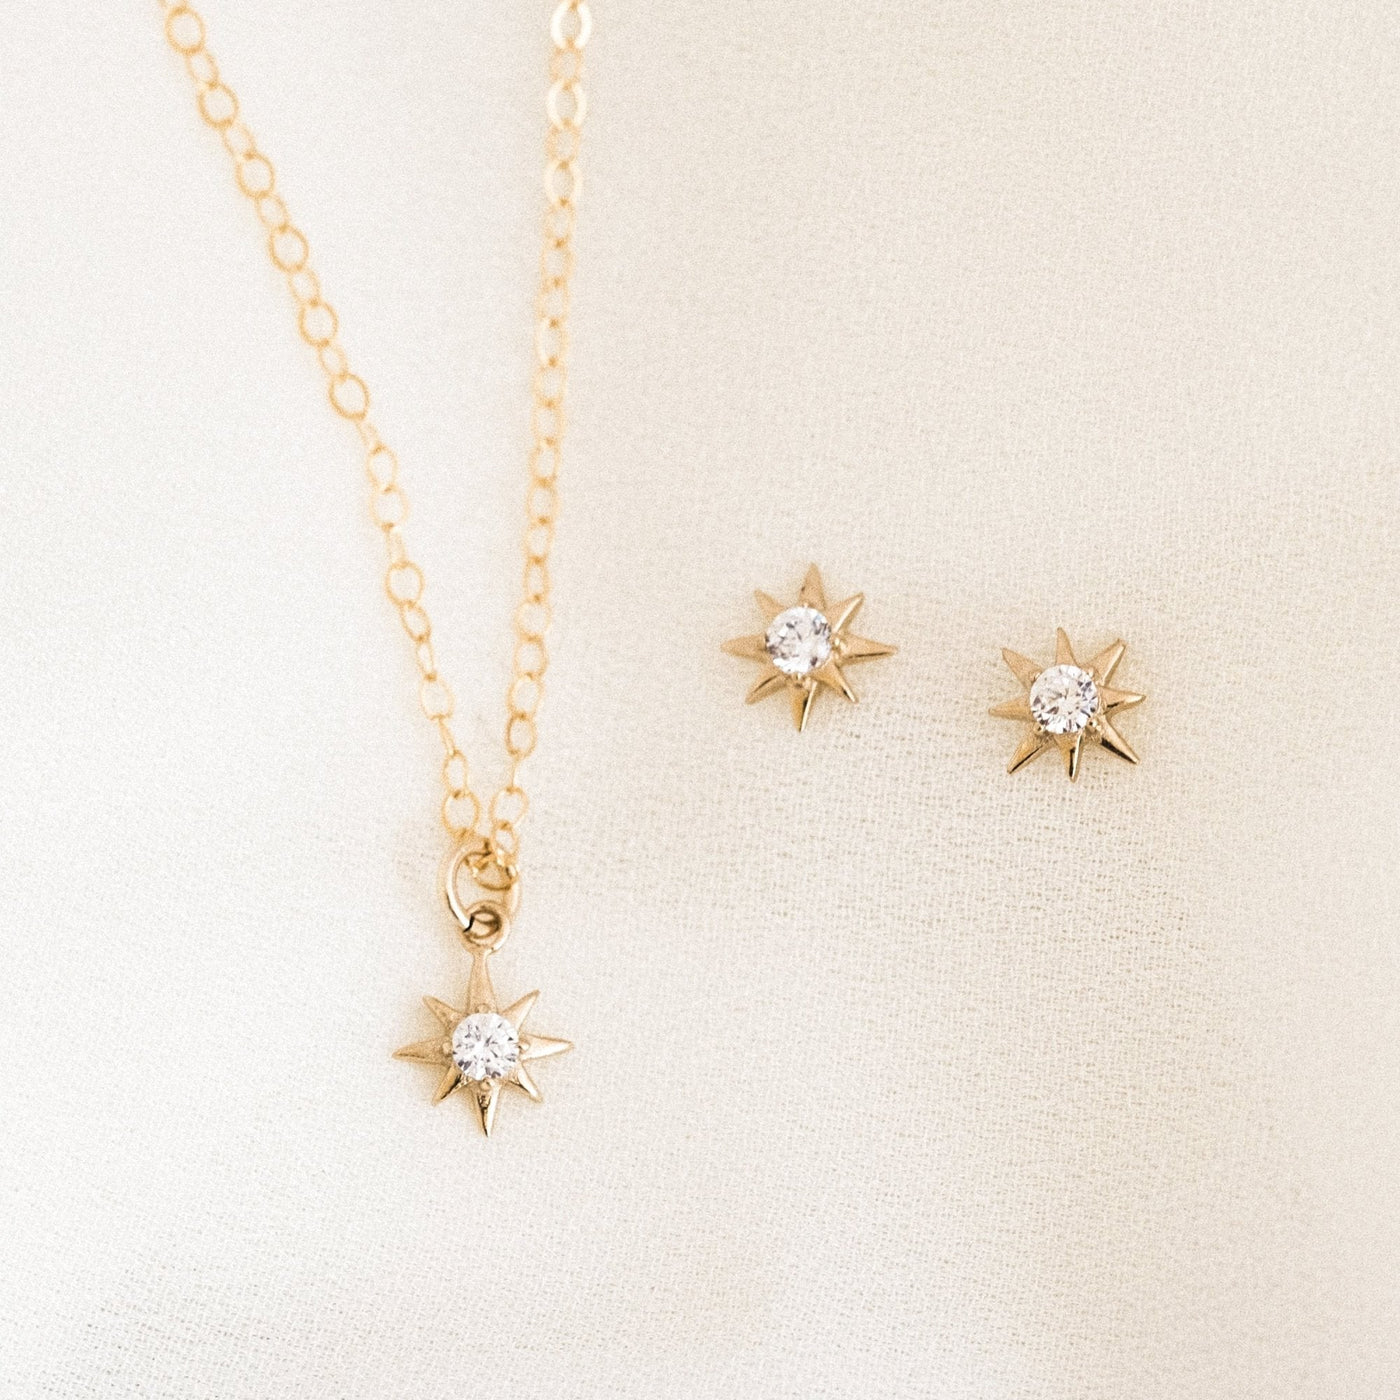 Starburst Necklace by Simple & Dainty Jewelry